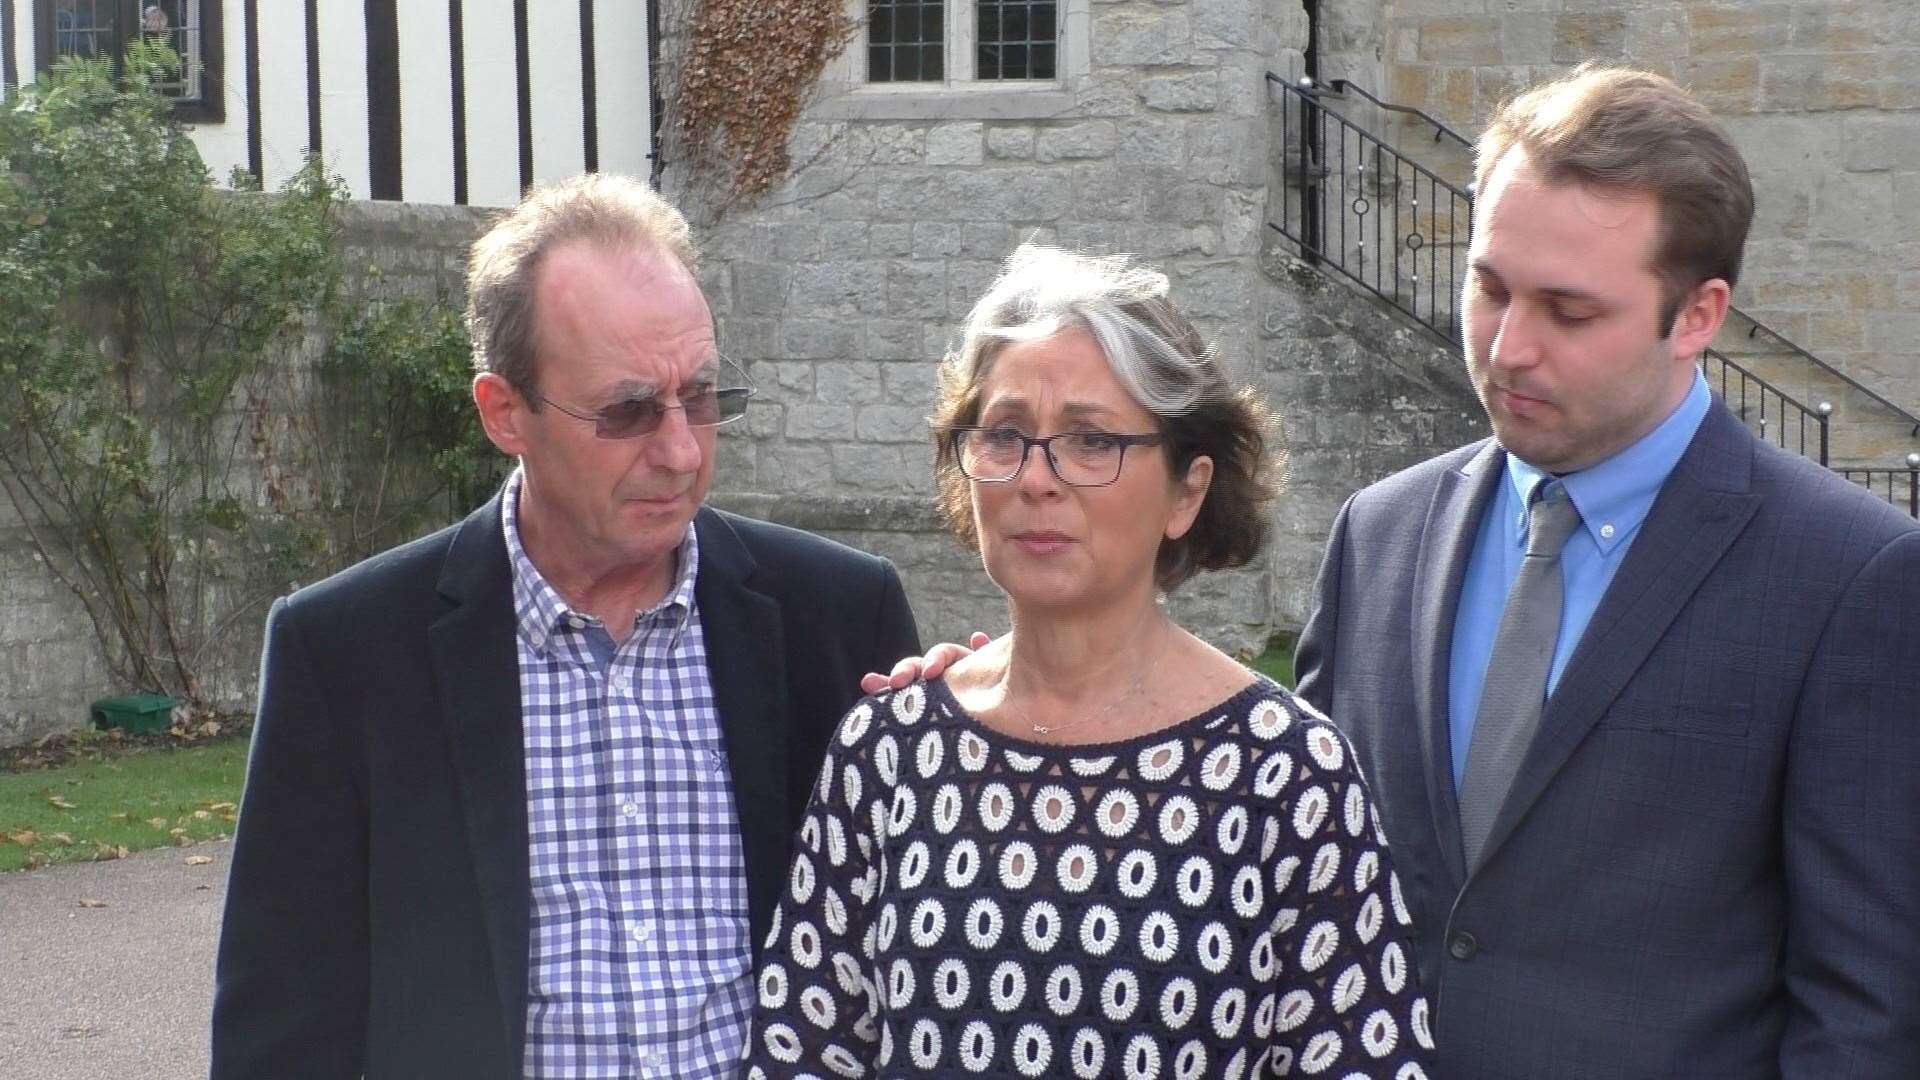 Tim Mason's parents, Gavin and Fiona, outside court (5121108)